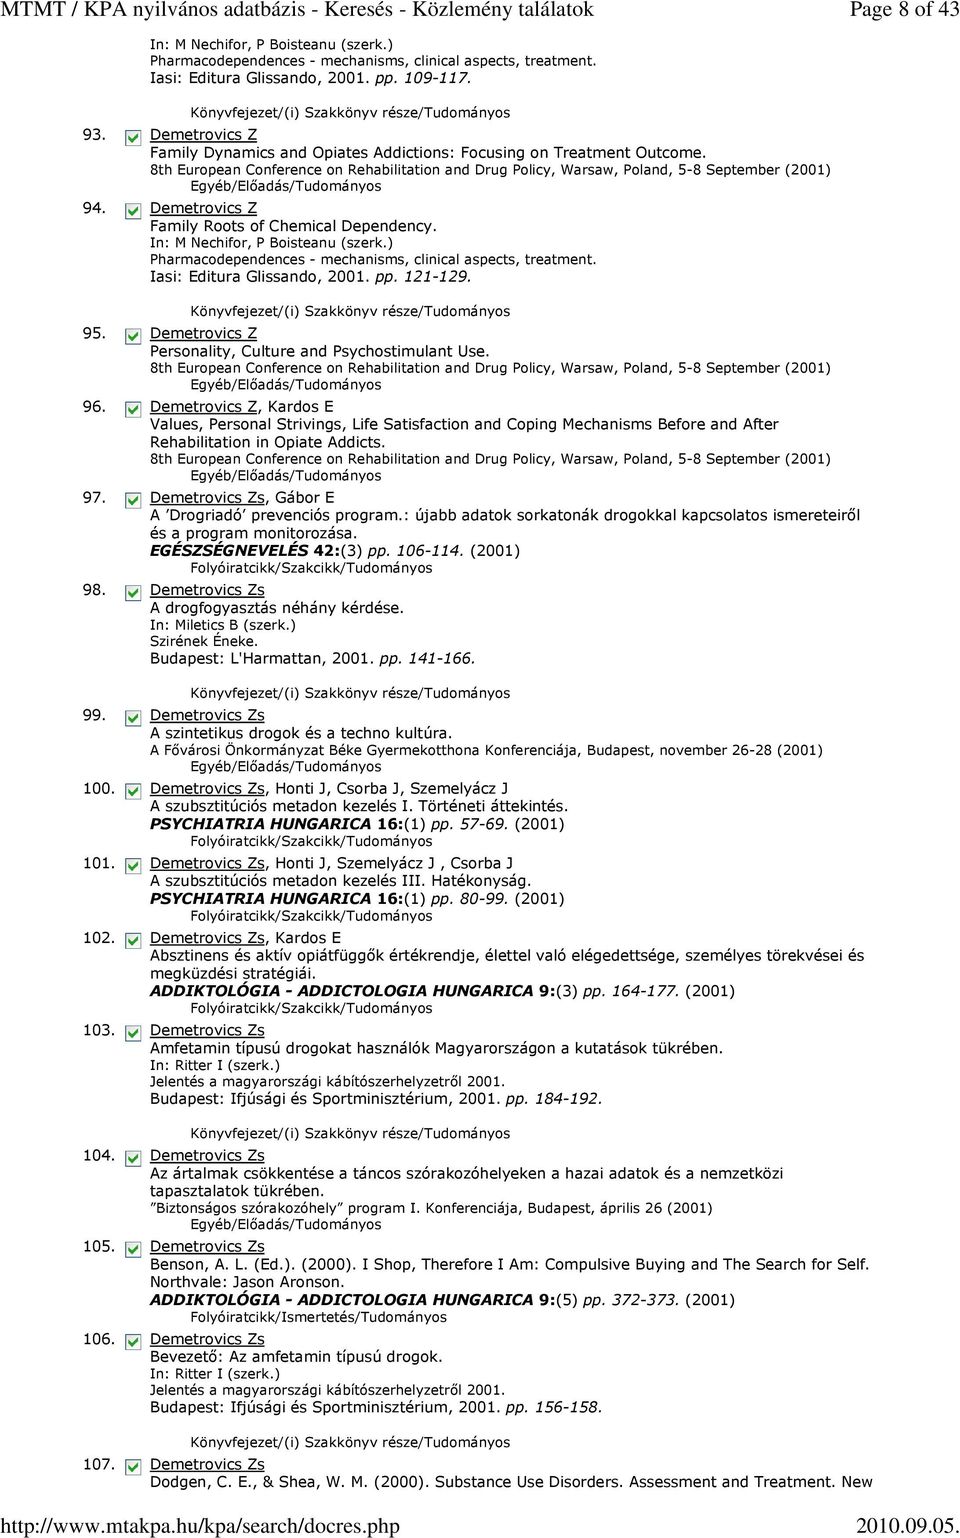 Demetrovics Z Family Roots of Chemical Dependency. In: M Nechifor, P Boisteanu (szerk.) Pharmacodependences - mechanisms, clinical aspects, treatment. Iasi: Editura Glissando, 2001. pp. 121-129. 95.